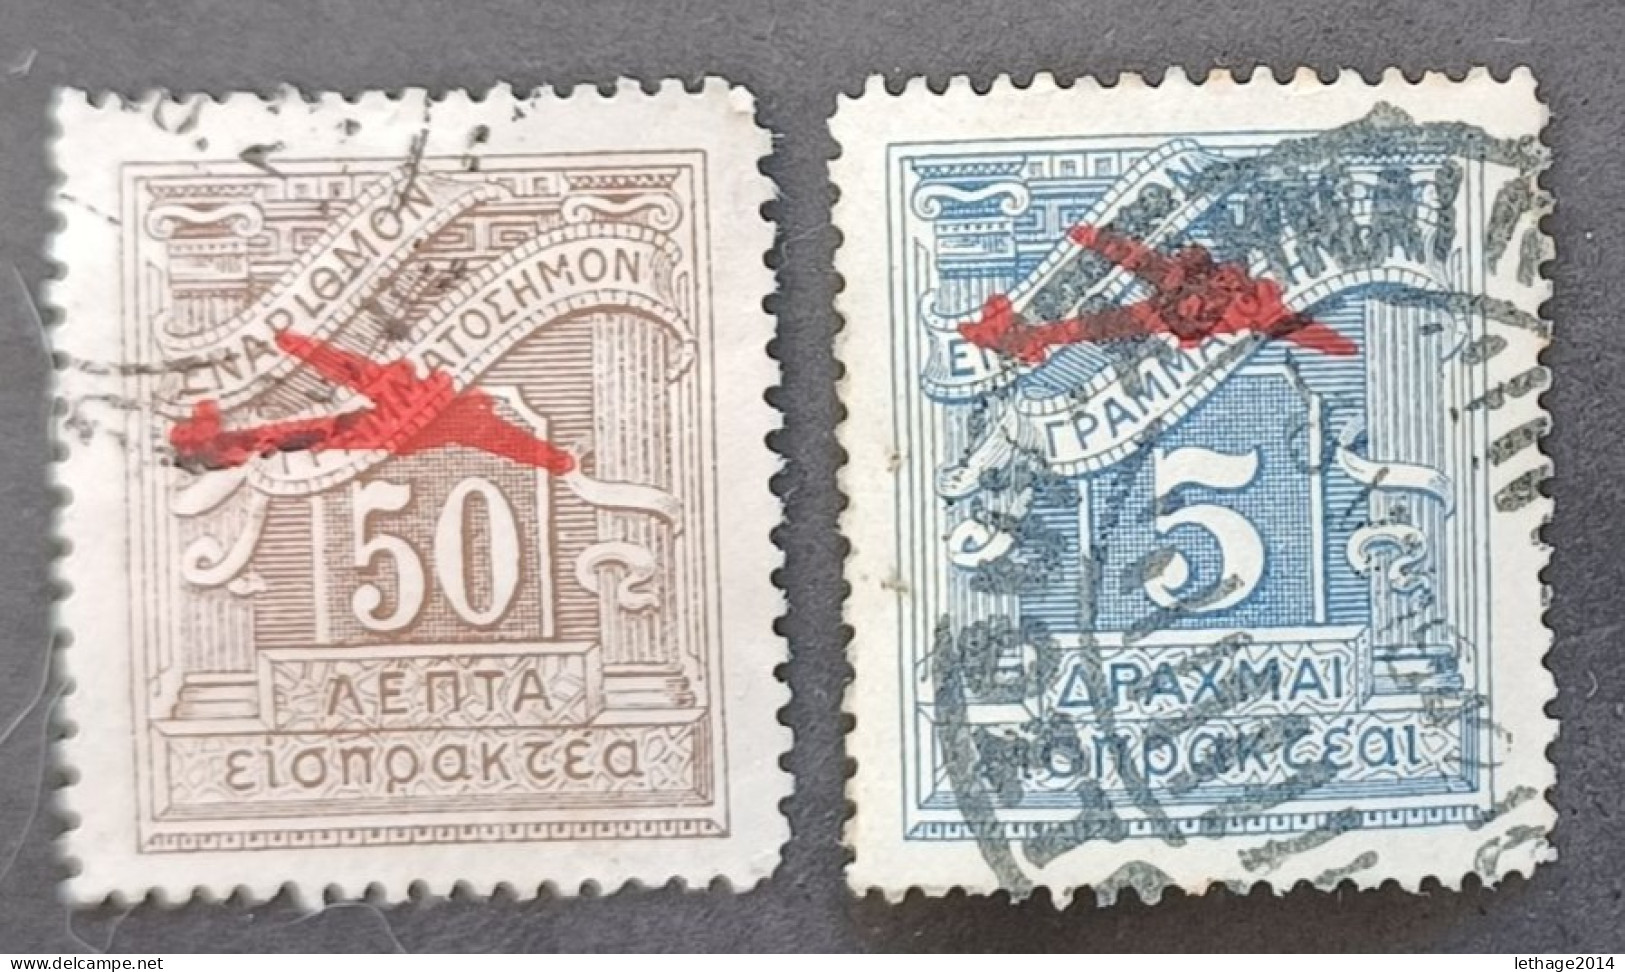 GREECE HELLAS GRECIA ΕΛΛΑΔΑ 1938 POSTAGE DUE CAT UNIF N A32-A35 - Used Stamps